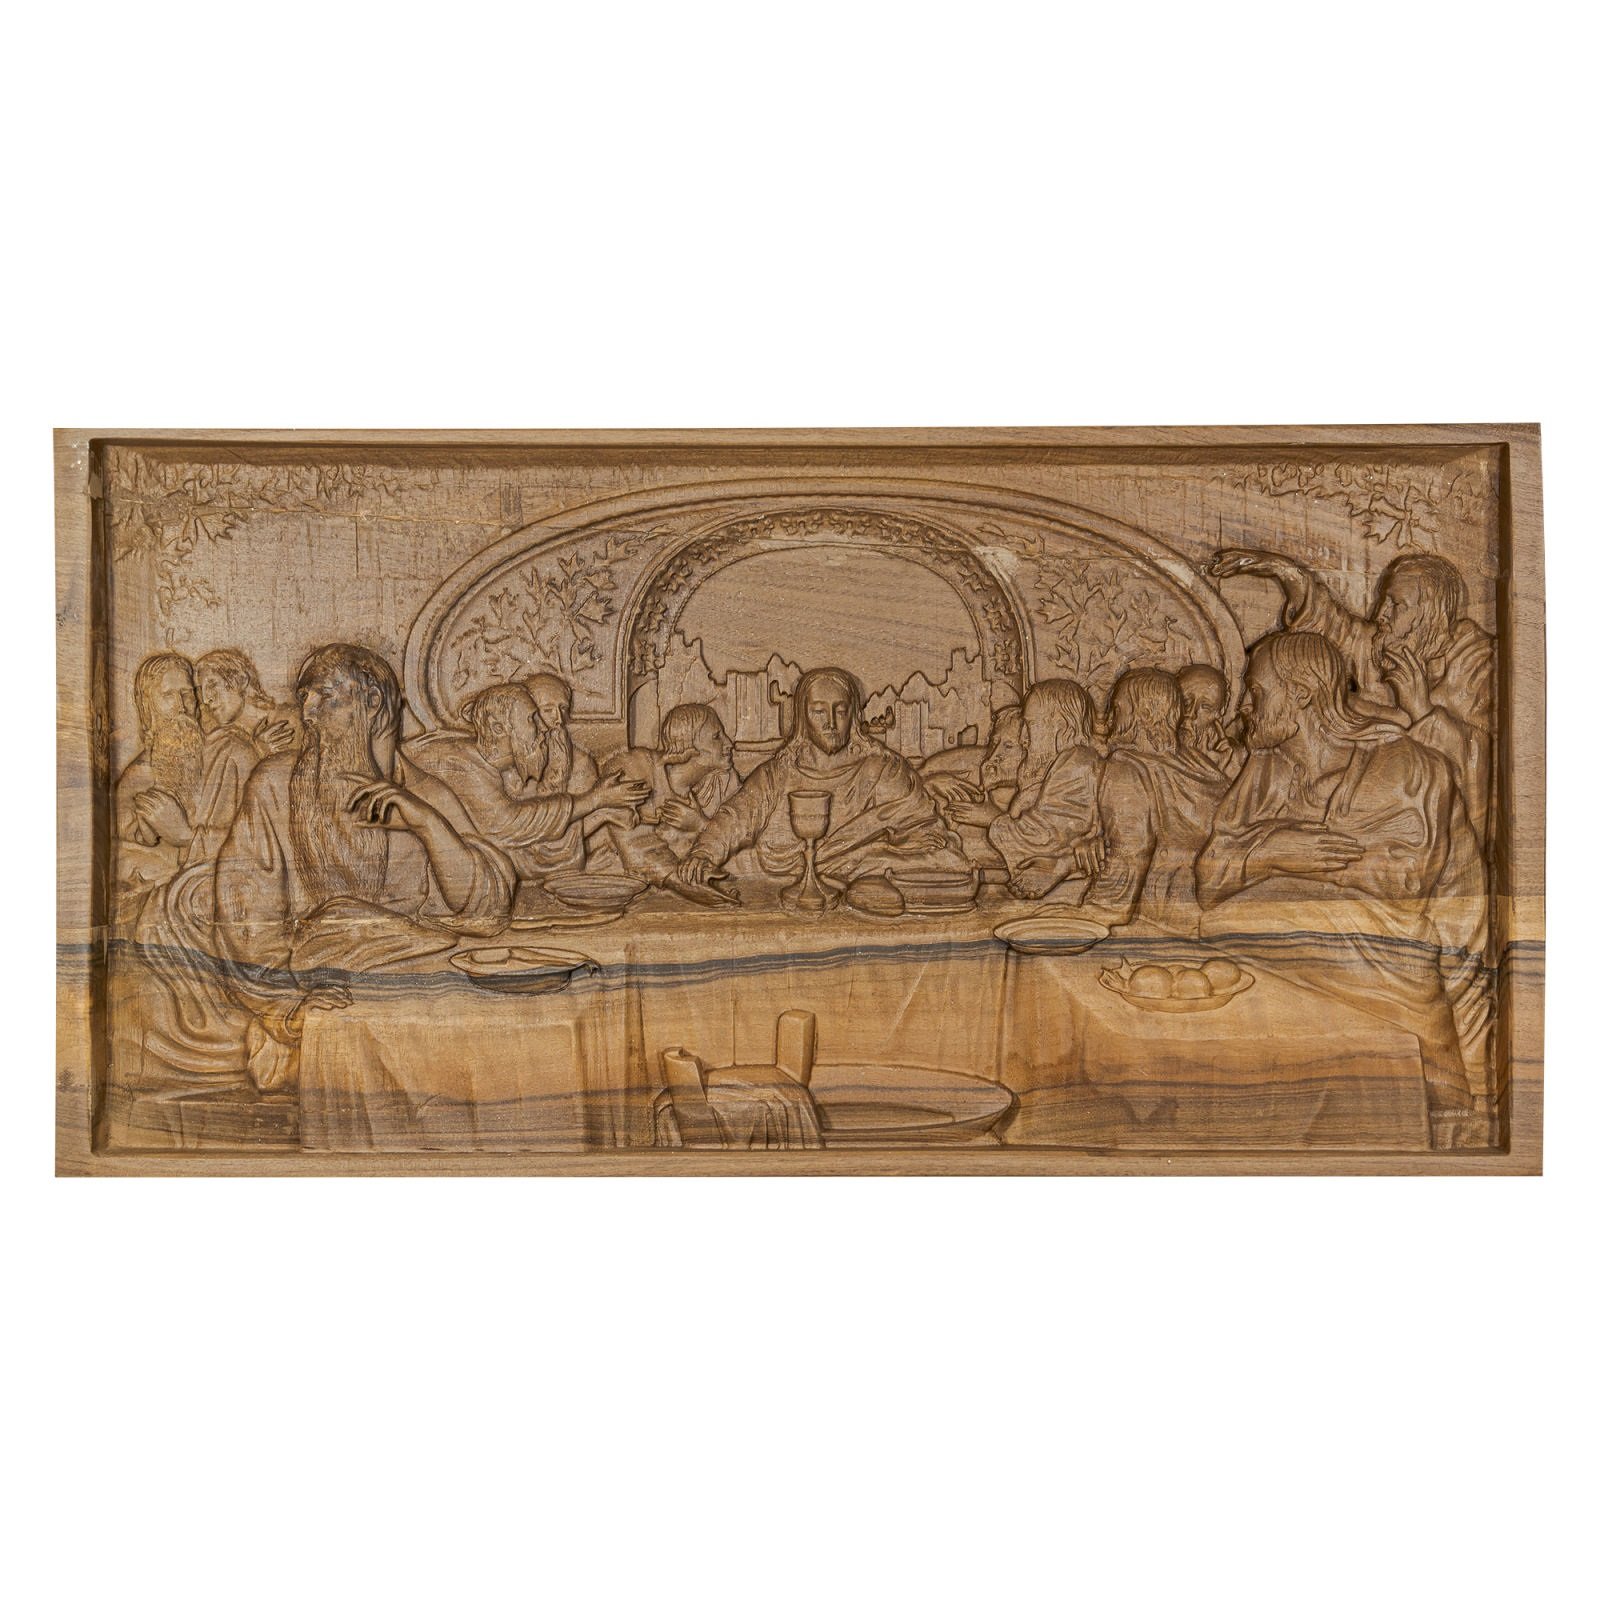 Handmade Wood Carving tableau sham akhar design code C6,Handmade Wood Carving tableau,Woodcarvings prices,price of Woodcarving dish